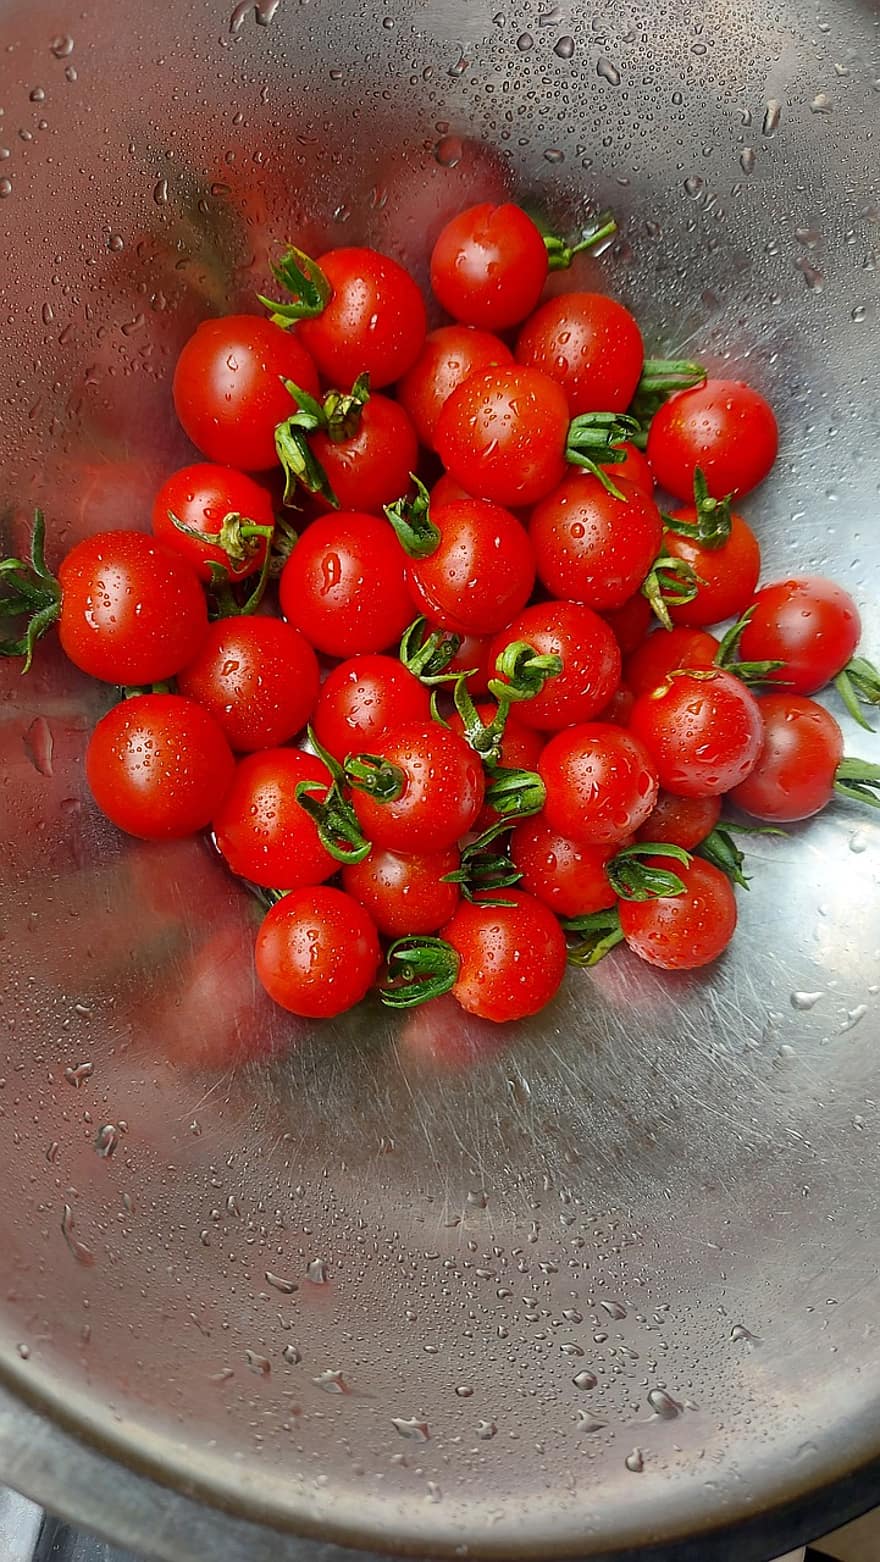 Tomatoes, Cherry Tomatoes, Produce, tomato, freshness, food, drop, close-up, vegetable, wet, healthy eating